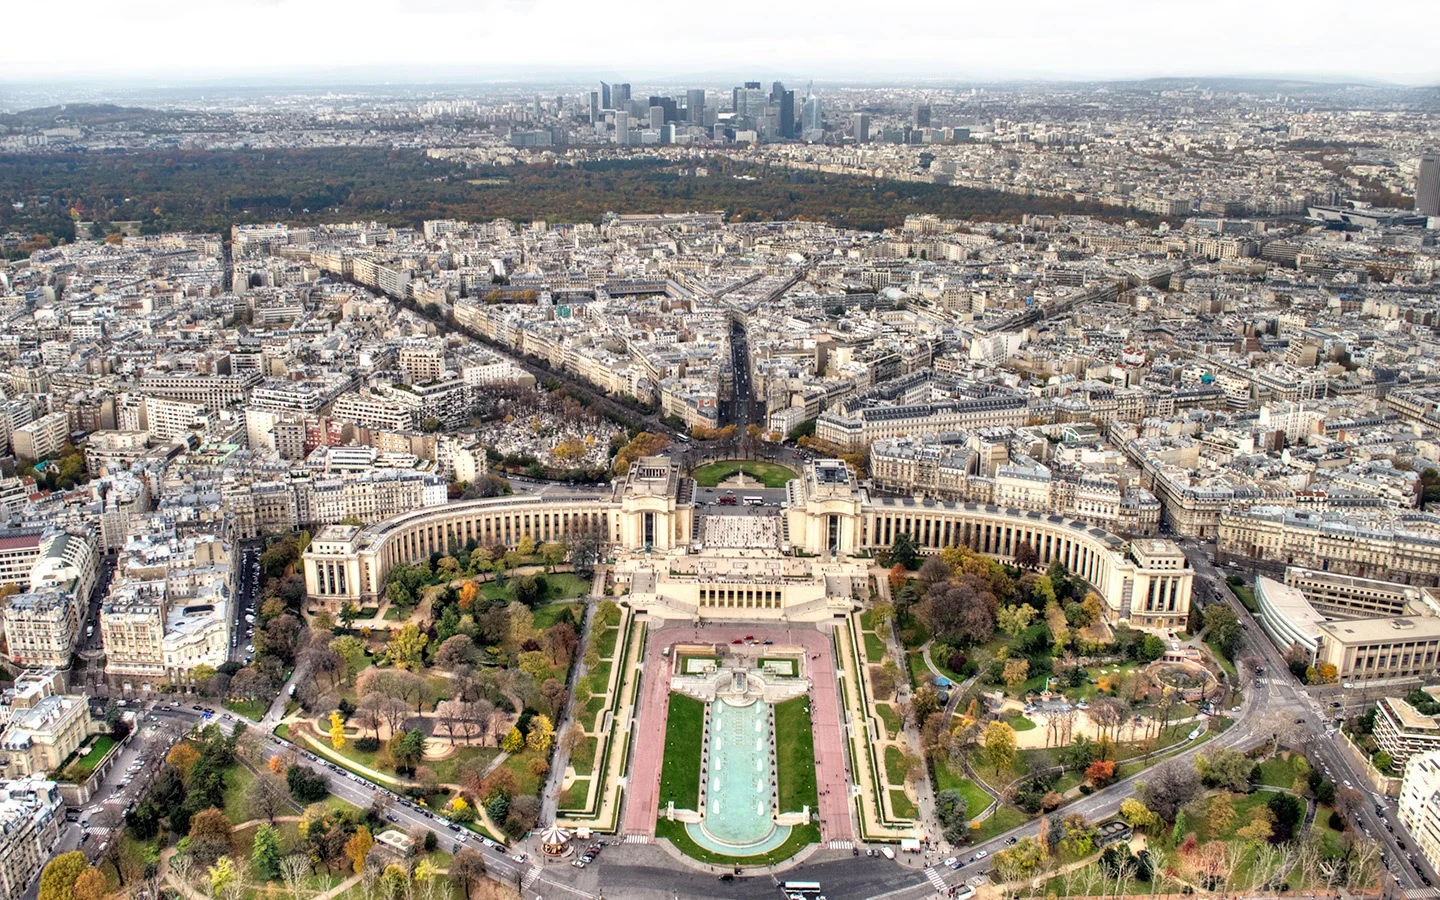 View of Trocadero from the top of the Eiffel Tower